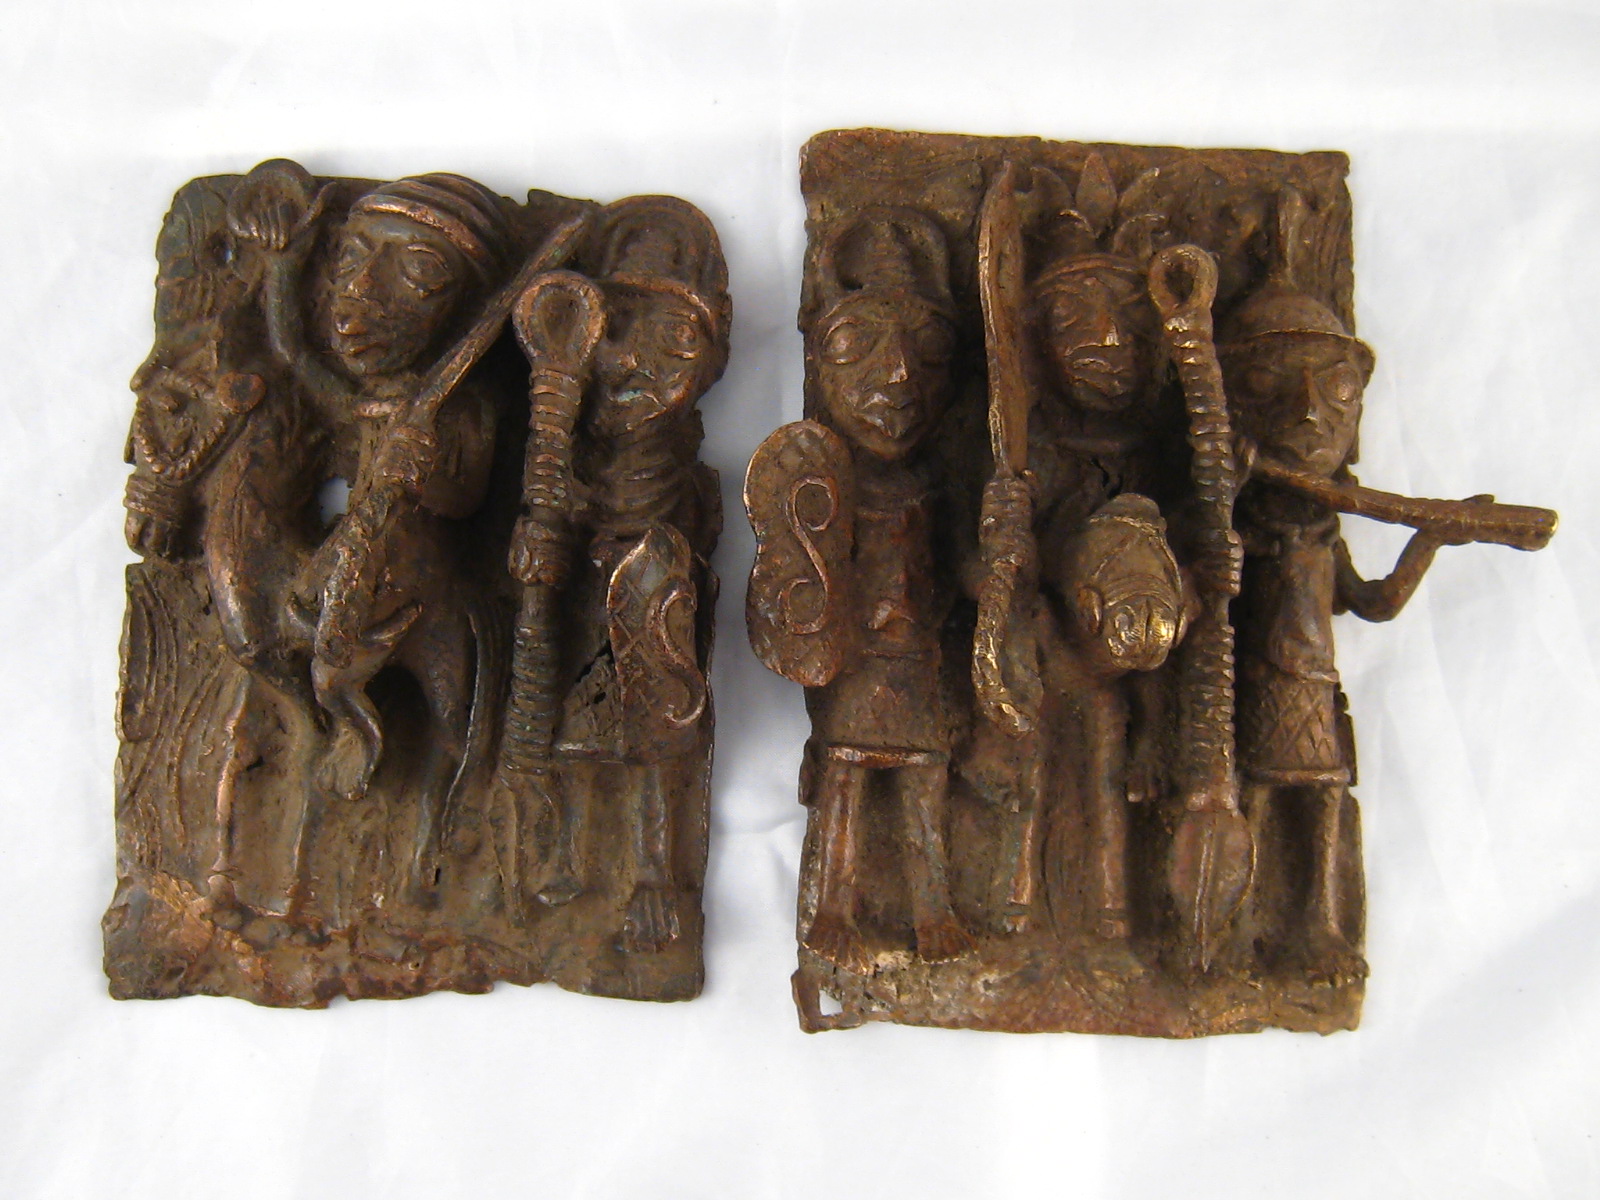 Tribal Art . Two Nigerian bronze plaques in high relief, 17x10 and 16x11 cm.